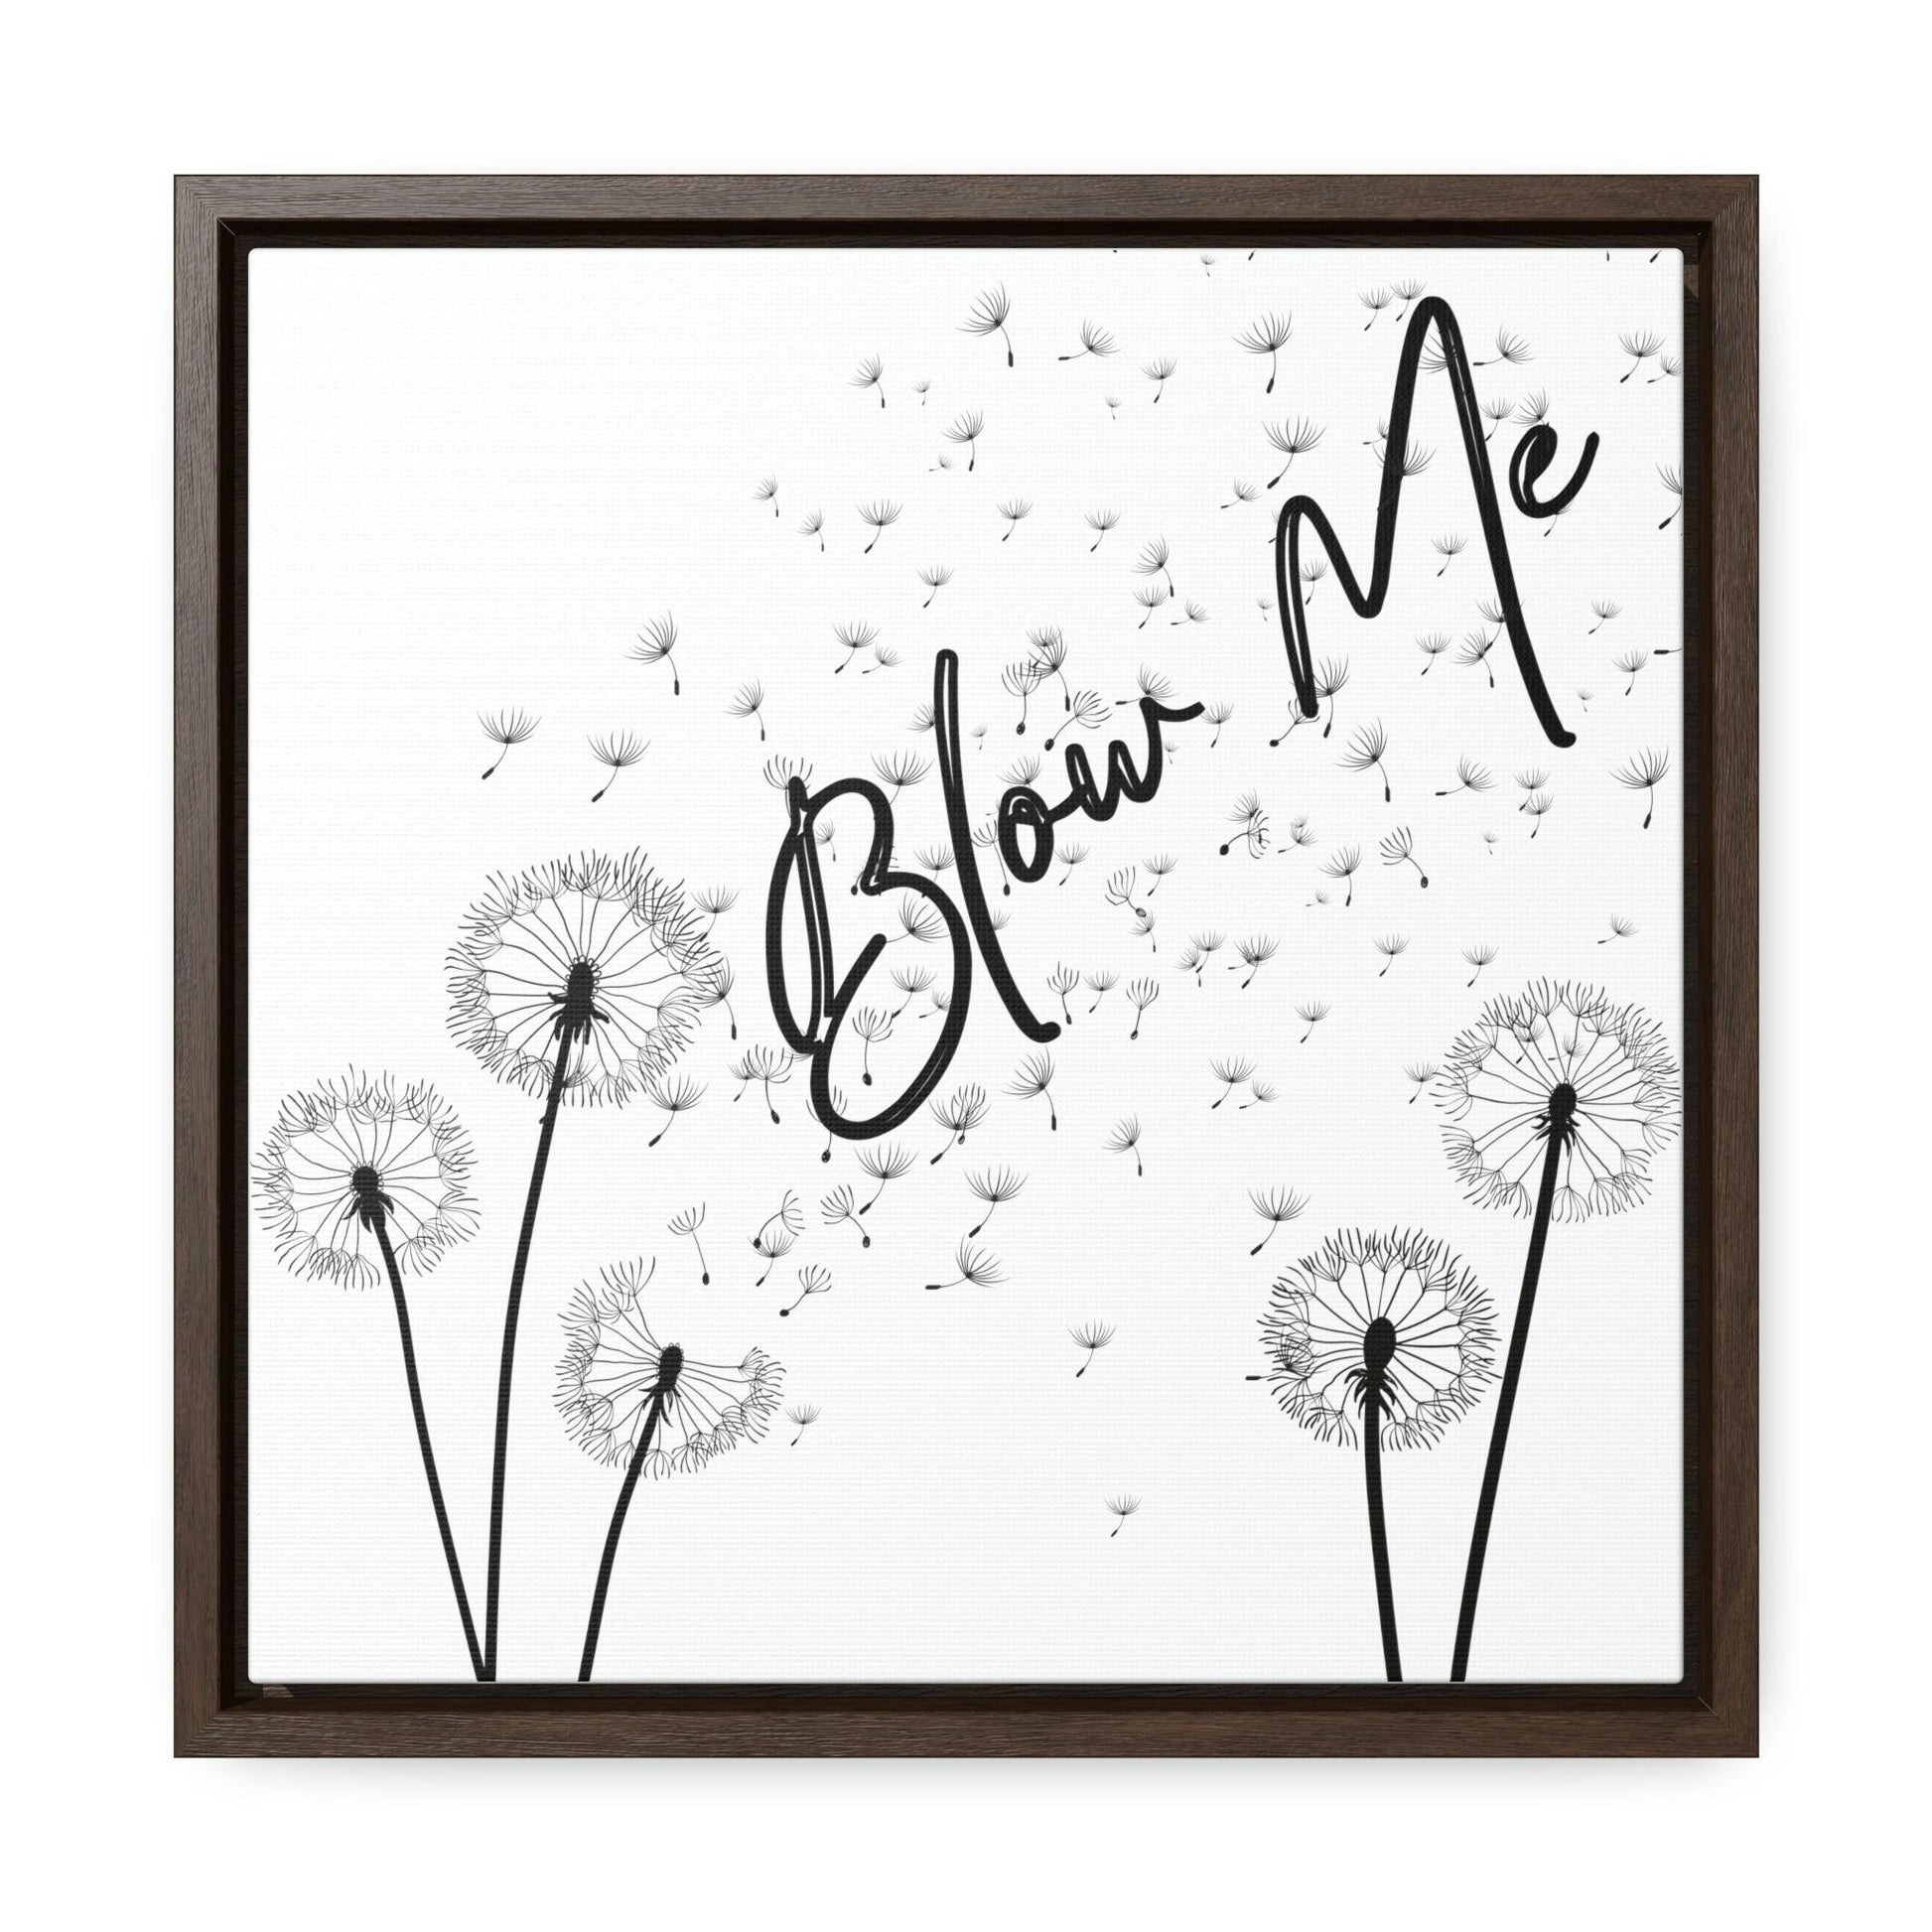 Blow Me - Gallery Canvas Wraps, Square Frame - Moxie Graphics